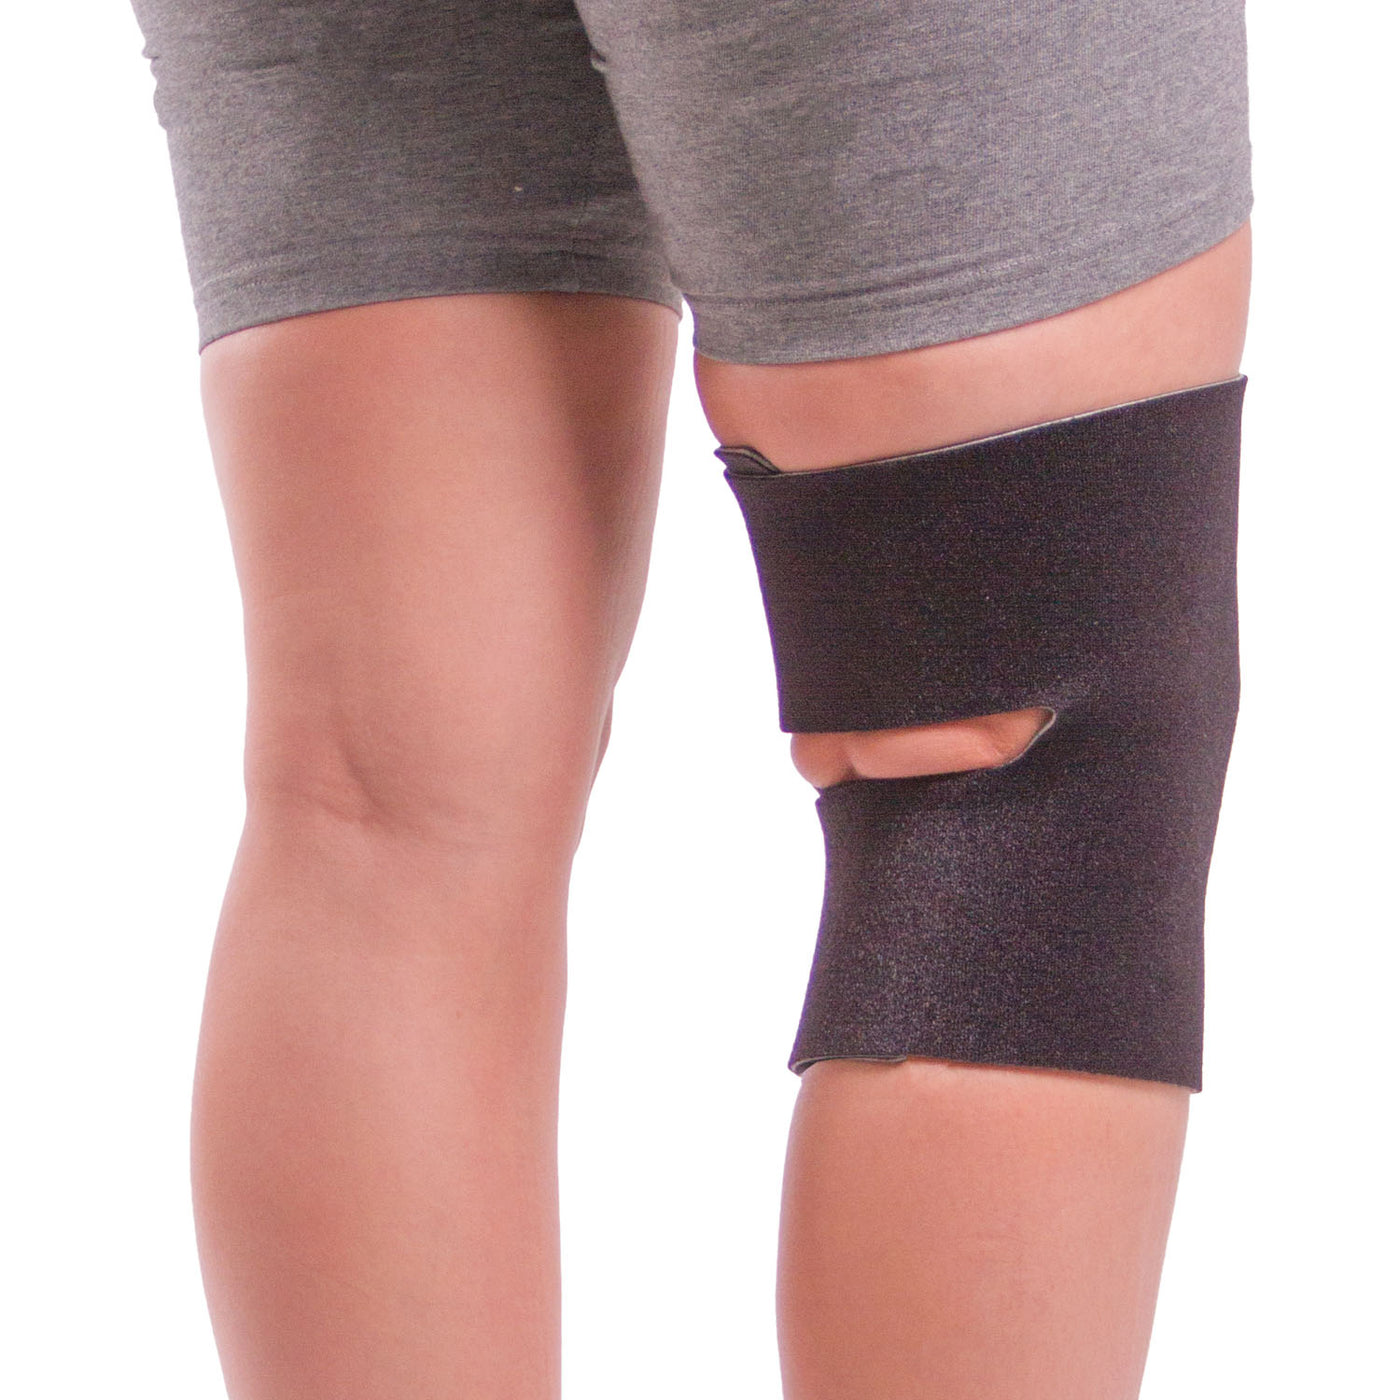 Open patella (kneecap) and open popliteal design makes this brace more breathable and prevents bunching